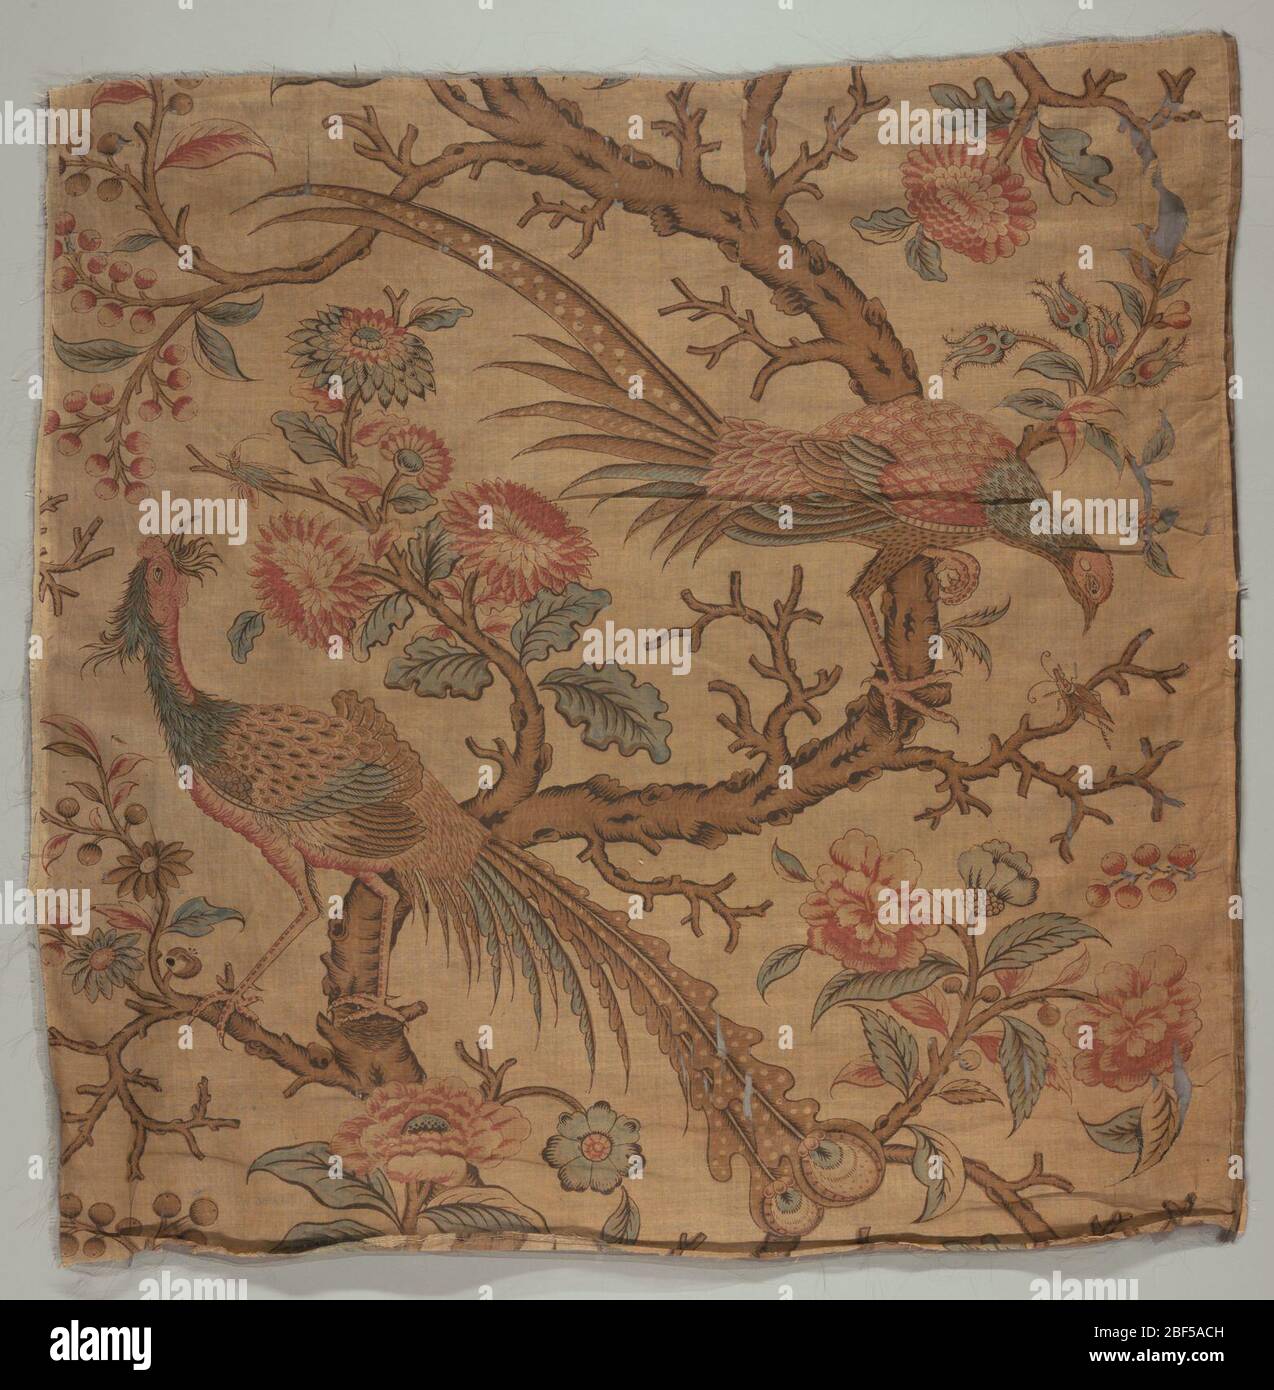 Textile. Printed panel in red, blue, yellow, green (blue with yellow) and shades of brown showing a large, curving tree trunk with two perching long-tailed birds. The one above leans down to pluck a grasshopper from a lower branch. Stock Photo